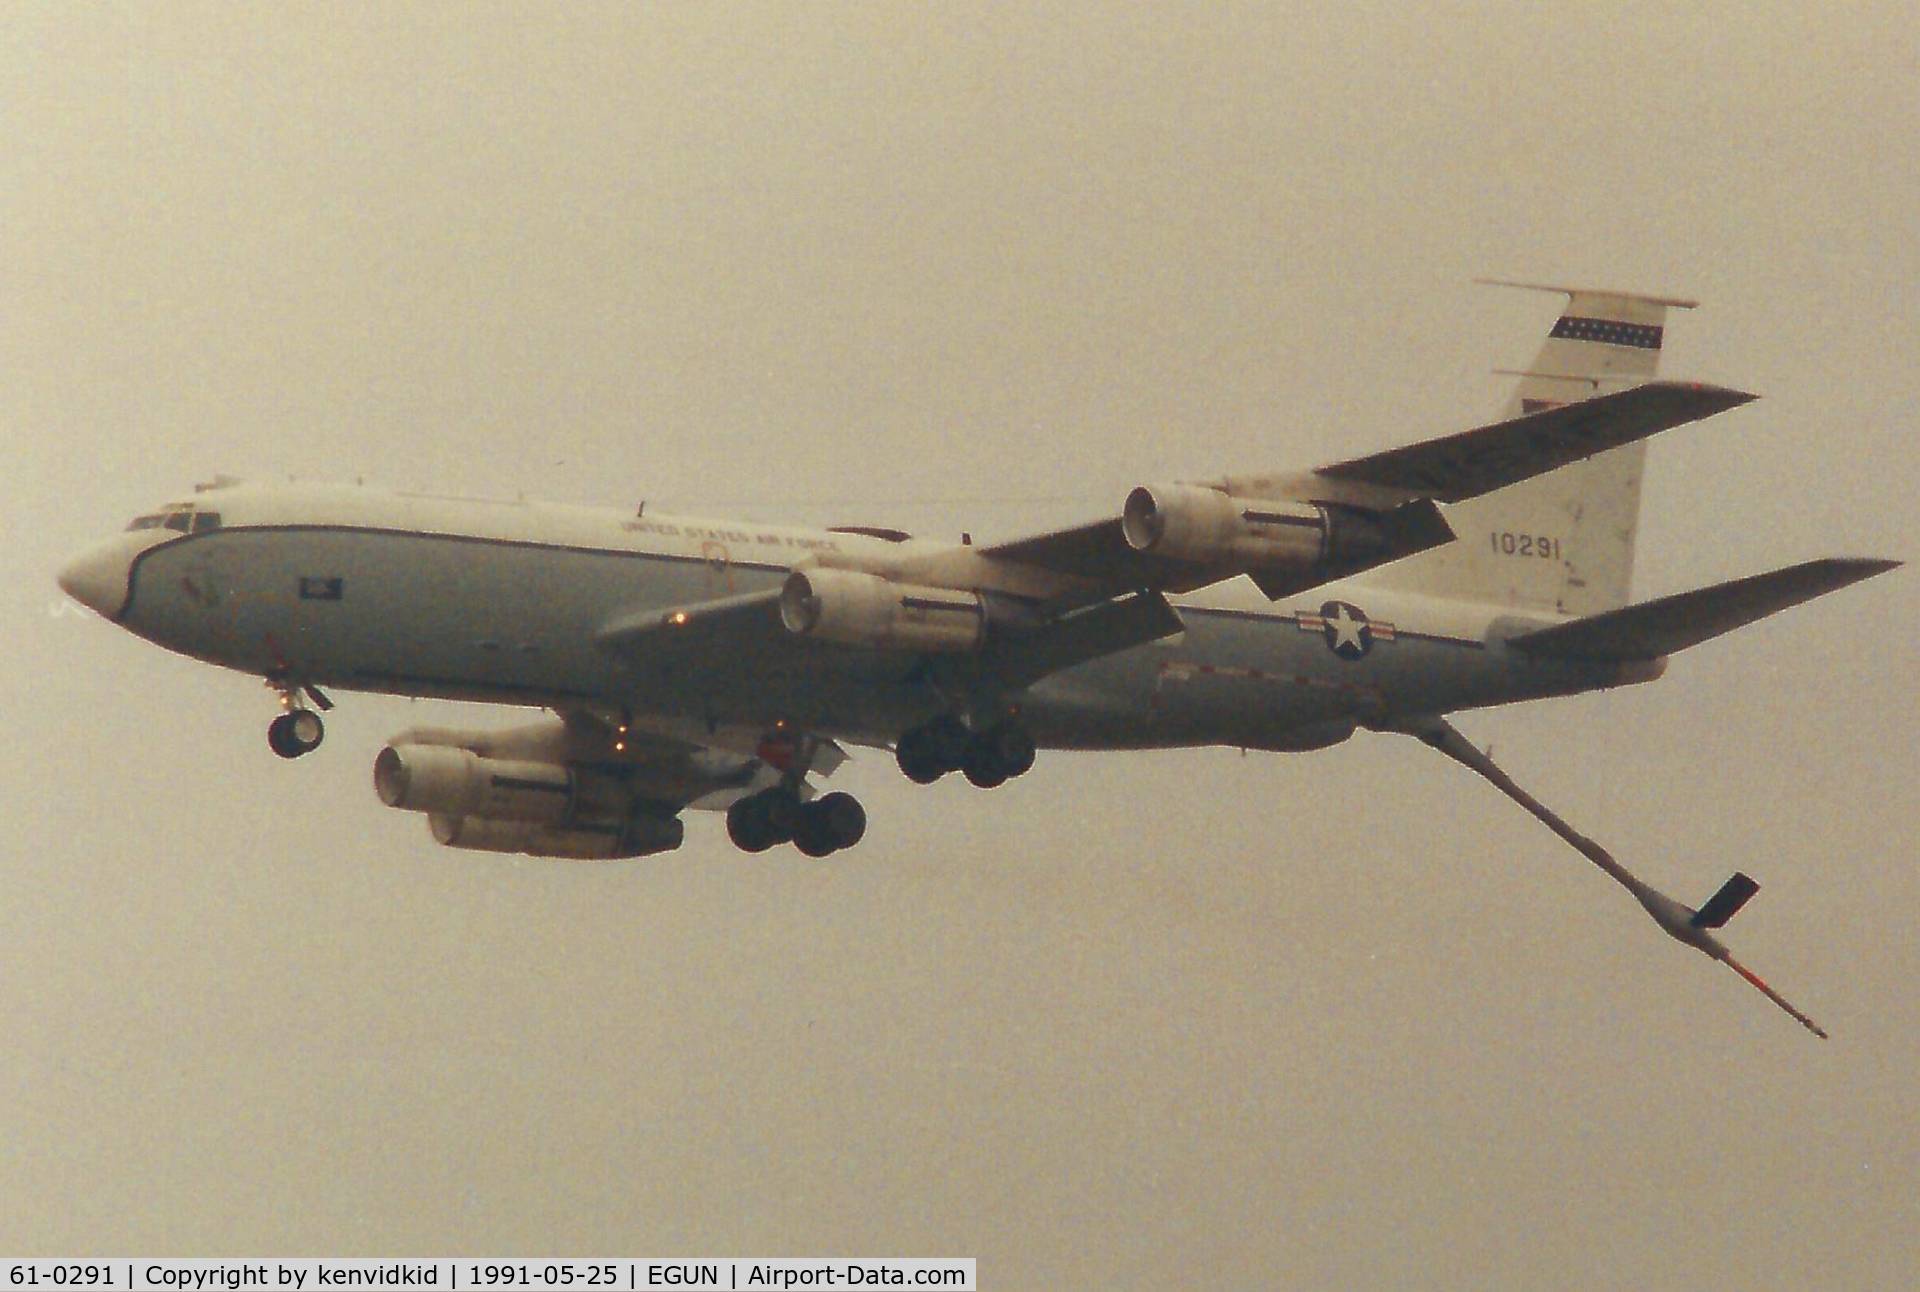 61-0291, 1961 Boeing EC-135H Stratotanker C/N 18198, At the 1991 Mildenhall Air Fete. Scanned from print.